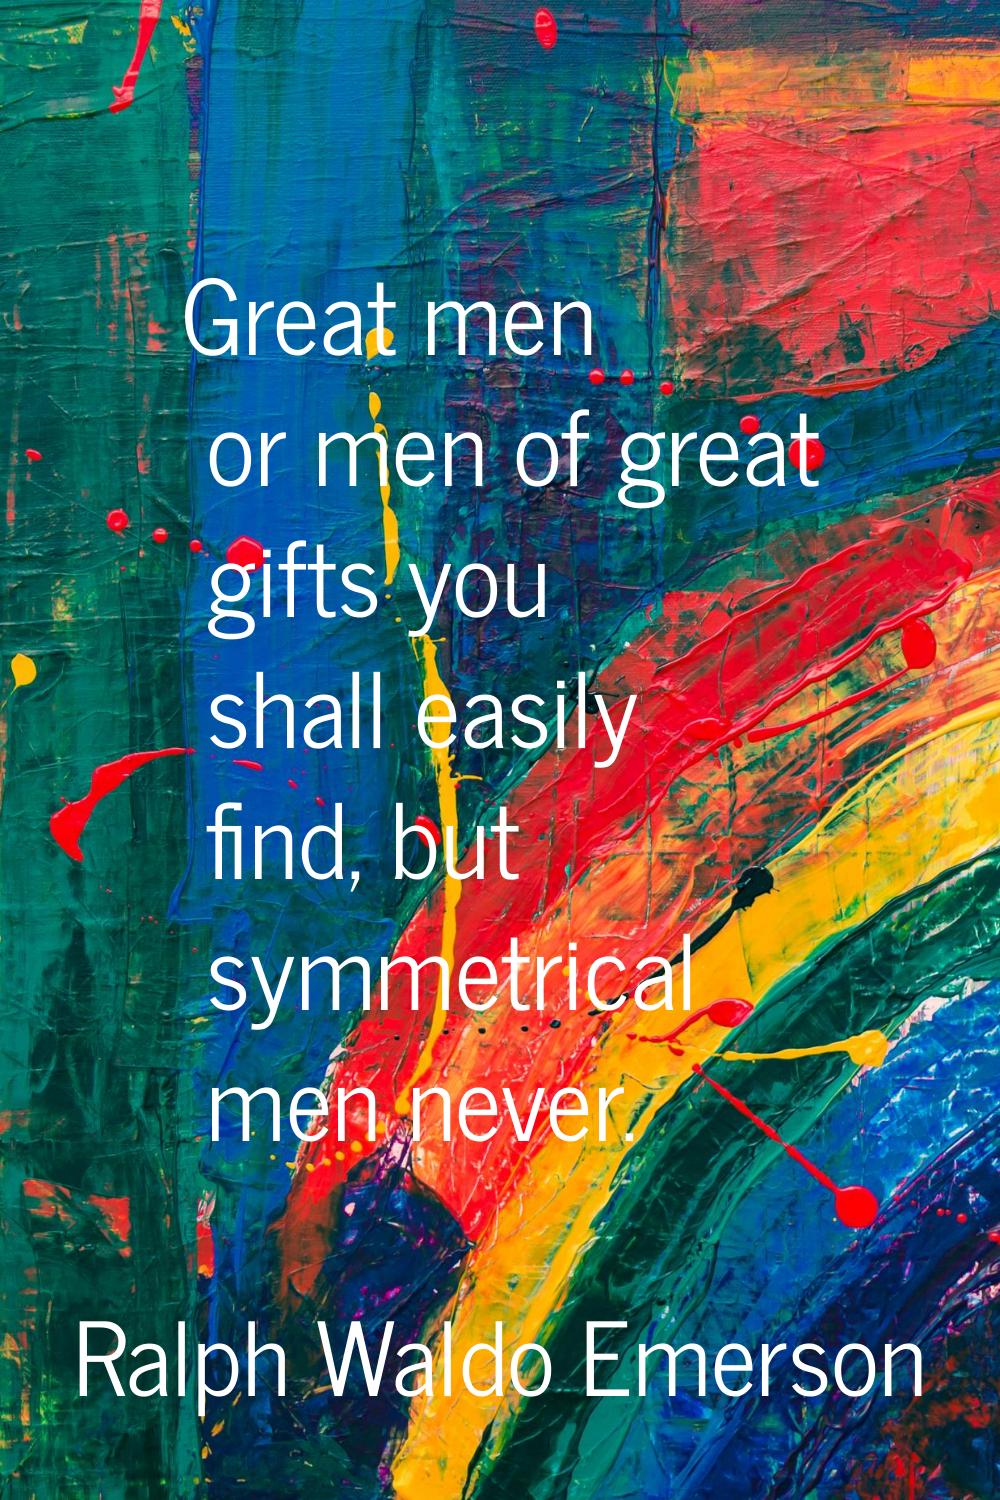 Great men or men of great gifts you shall easily find, but symmetrical men never.